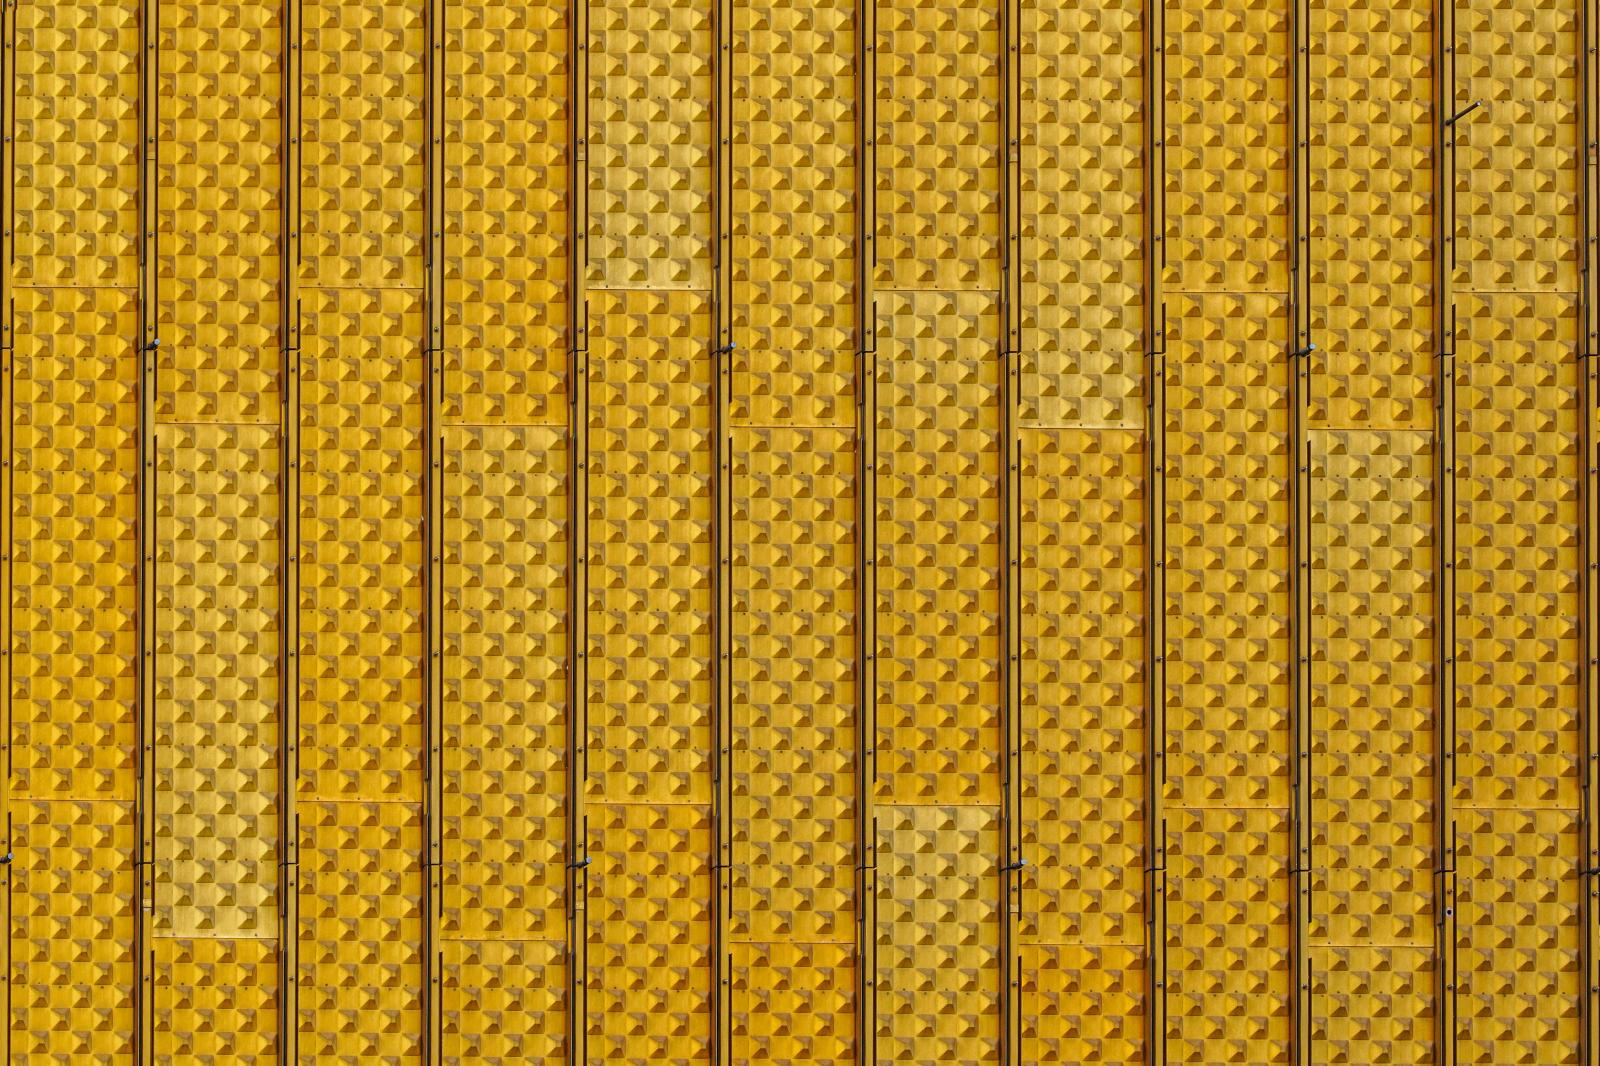 Facade of the Berlin Philharmonic Hall - Part of the Kulturforum | Buy this image